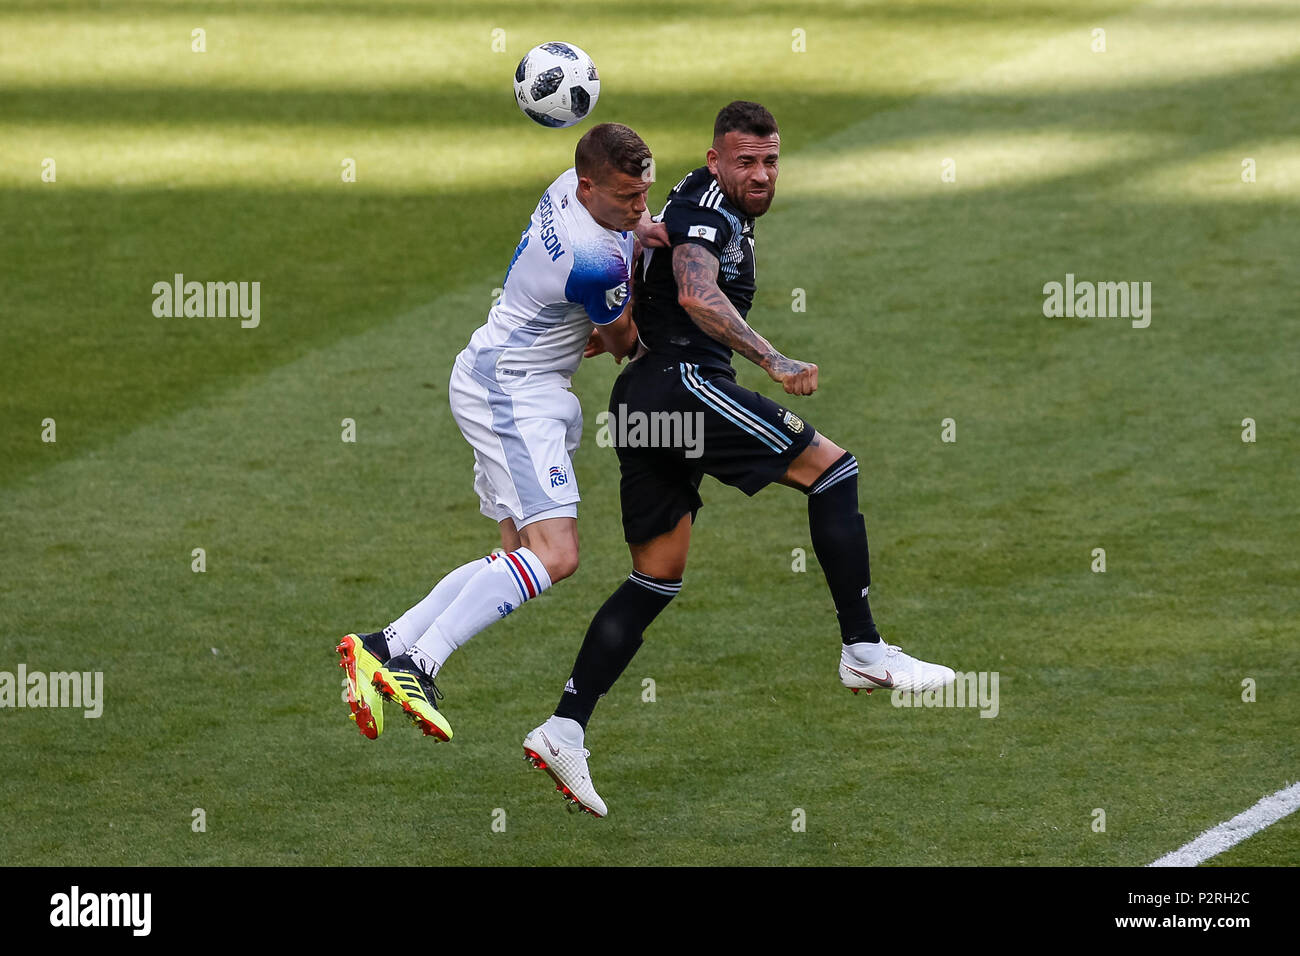 Moscow, Russia. 16th Jun, 2018. Alfred Finnbogason of Iceland and Nicolas Otamendi of Argentina during the 2018 FIFA World Cup Group D match between Argentina and Iceland at Spartak Stadium on June 16th 2018 in Moscow, Russia. (Photo by Daniel Chesterton/phcimages.com) Credit: PHC Images/Alamy Live News Stock Photo